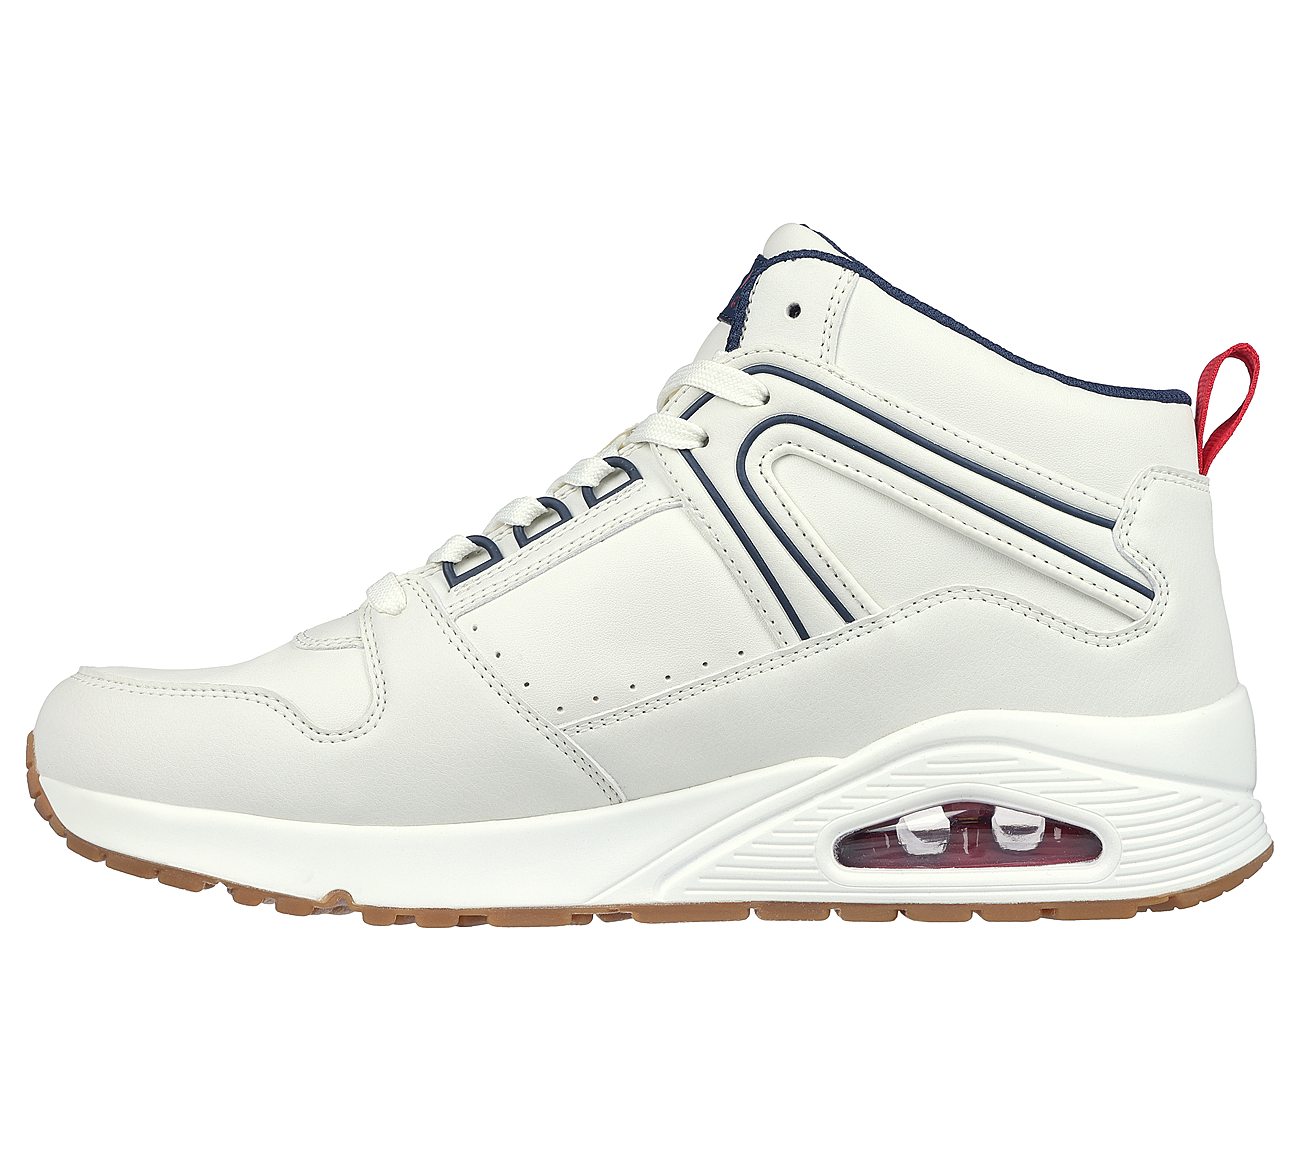 UNO - KEEP CLOSE, WHITE/NAVY/RED Footwear Left View